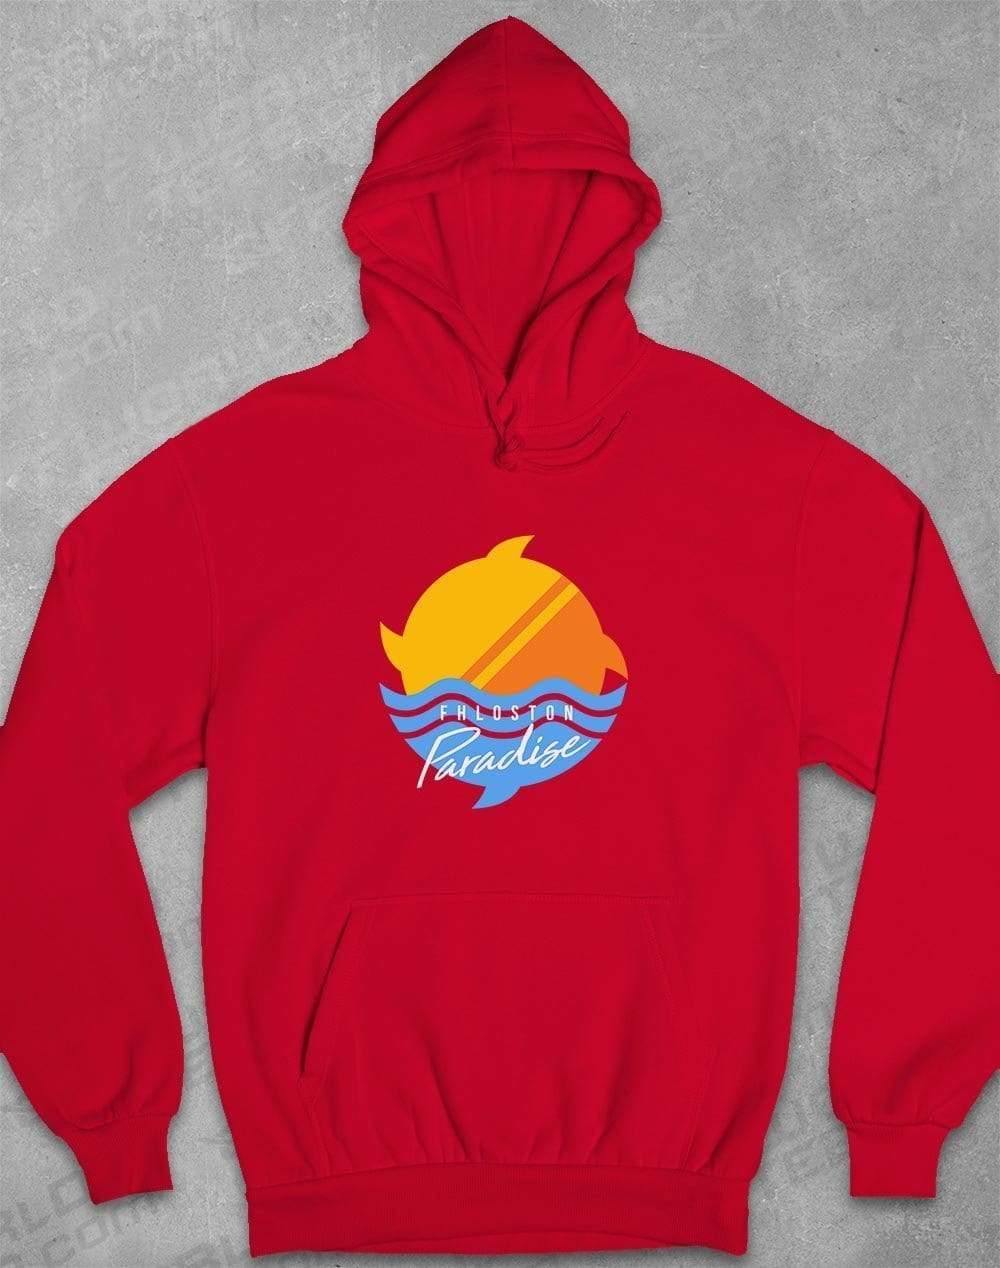 Fhloston Paradise Classic Hoodie S / Red  - Off World Tees